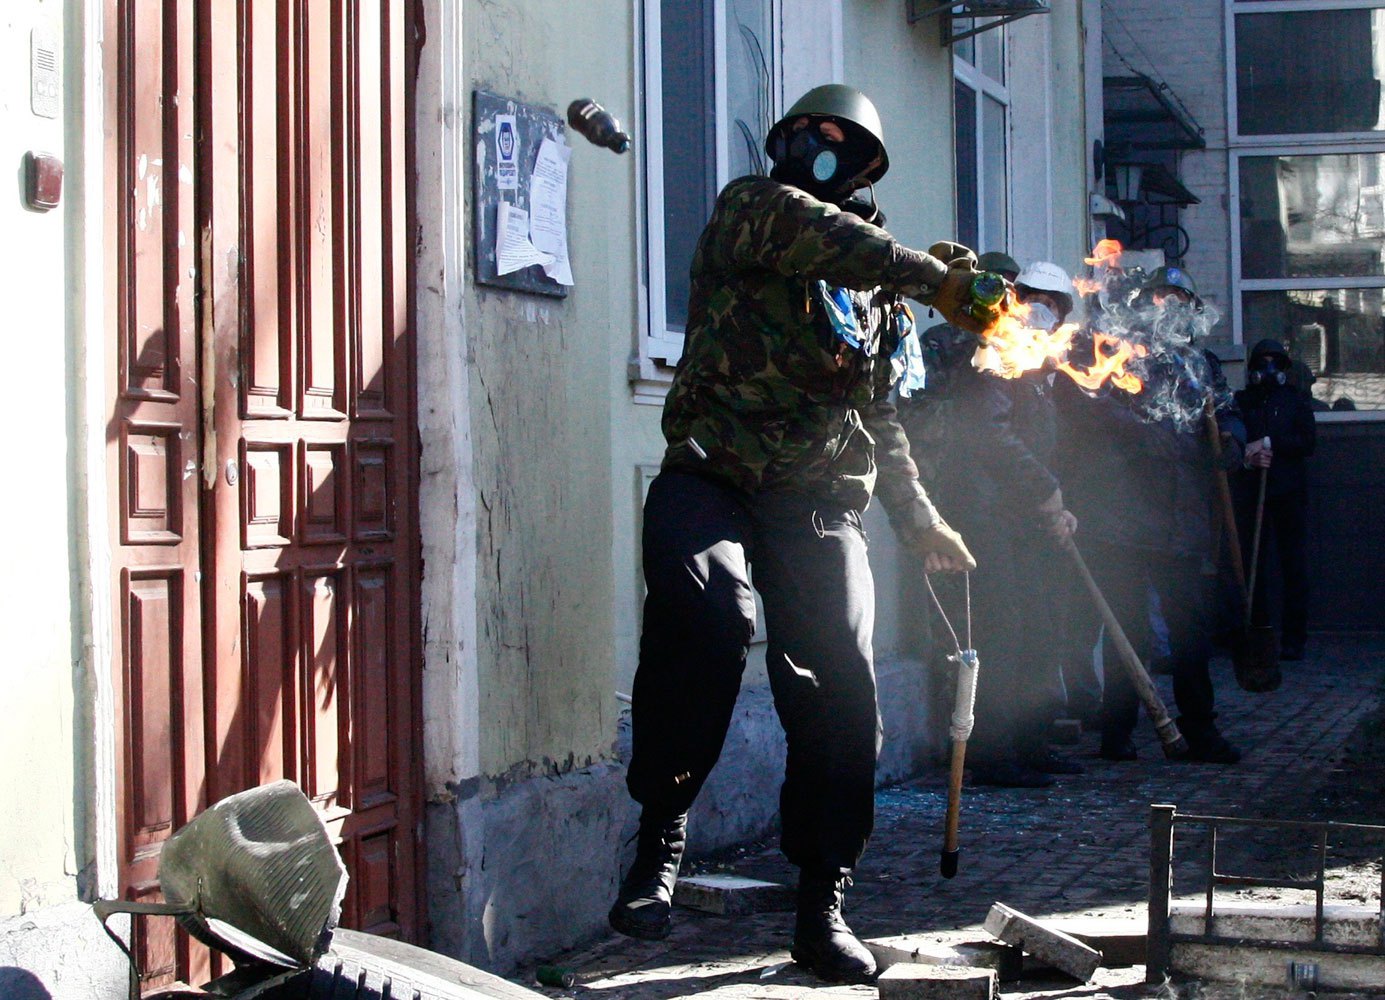 An anti-government protester holds a Molotov cocktail during clashes with Interior Ministry members in Kiev, on Feb. 18, 2014.